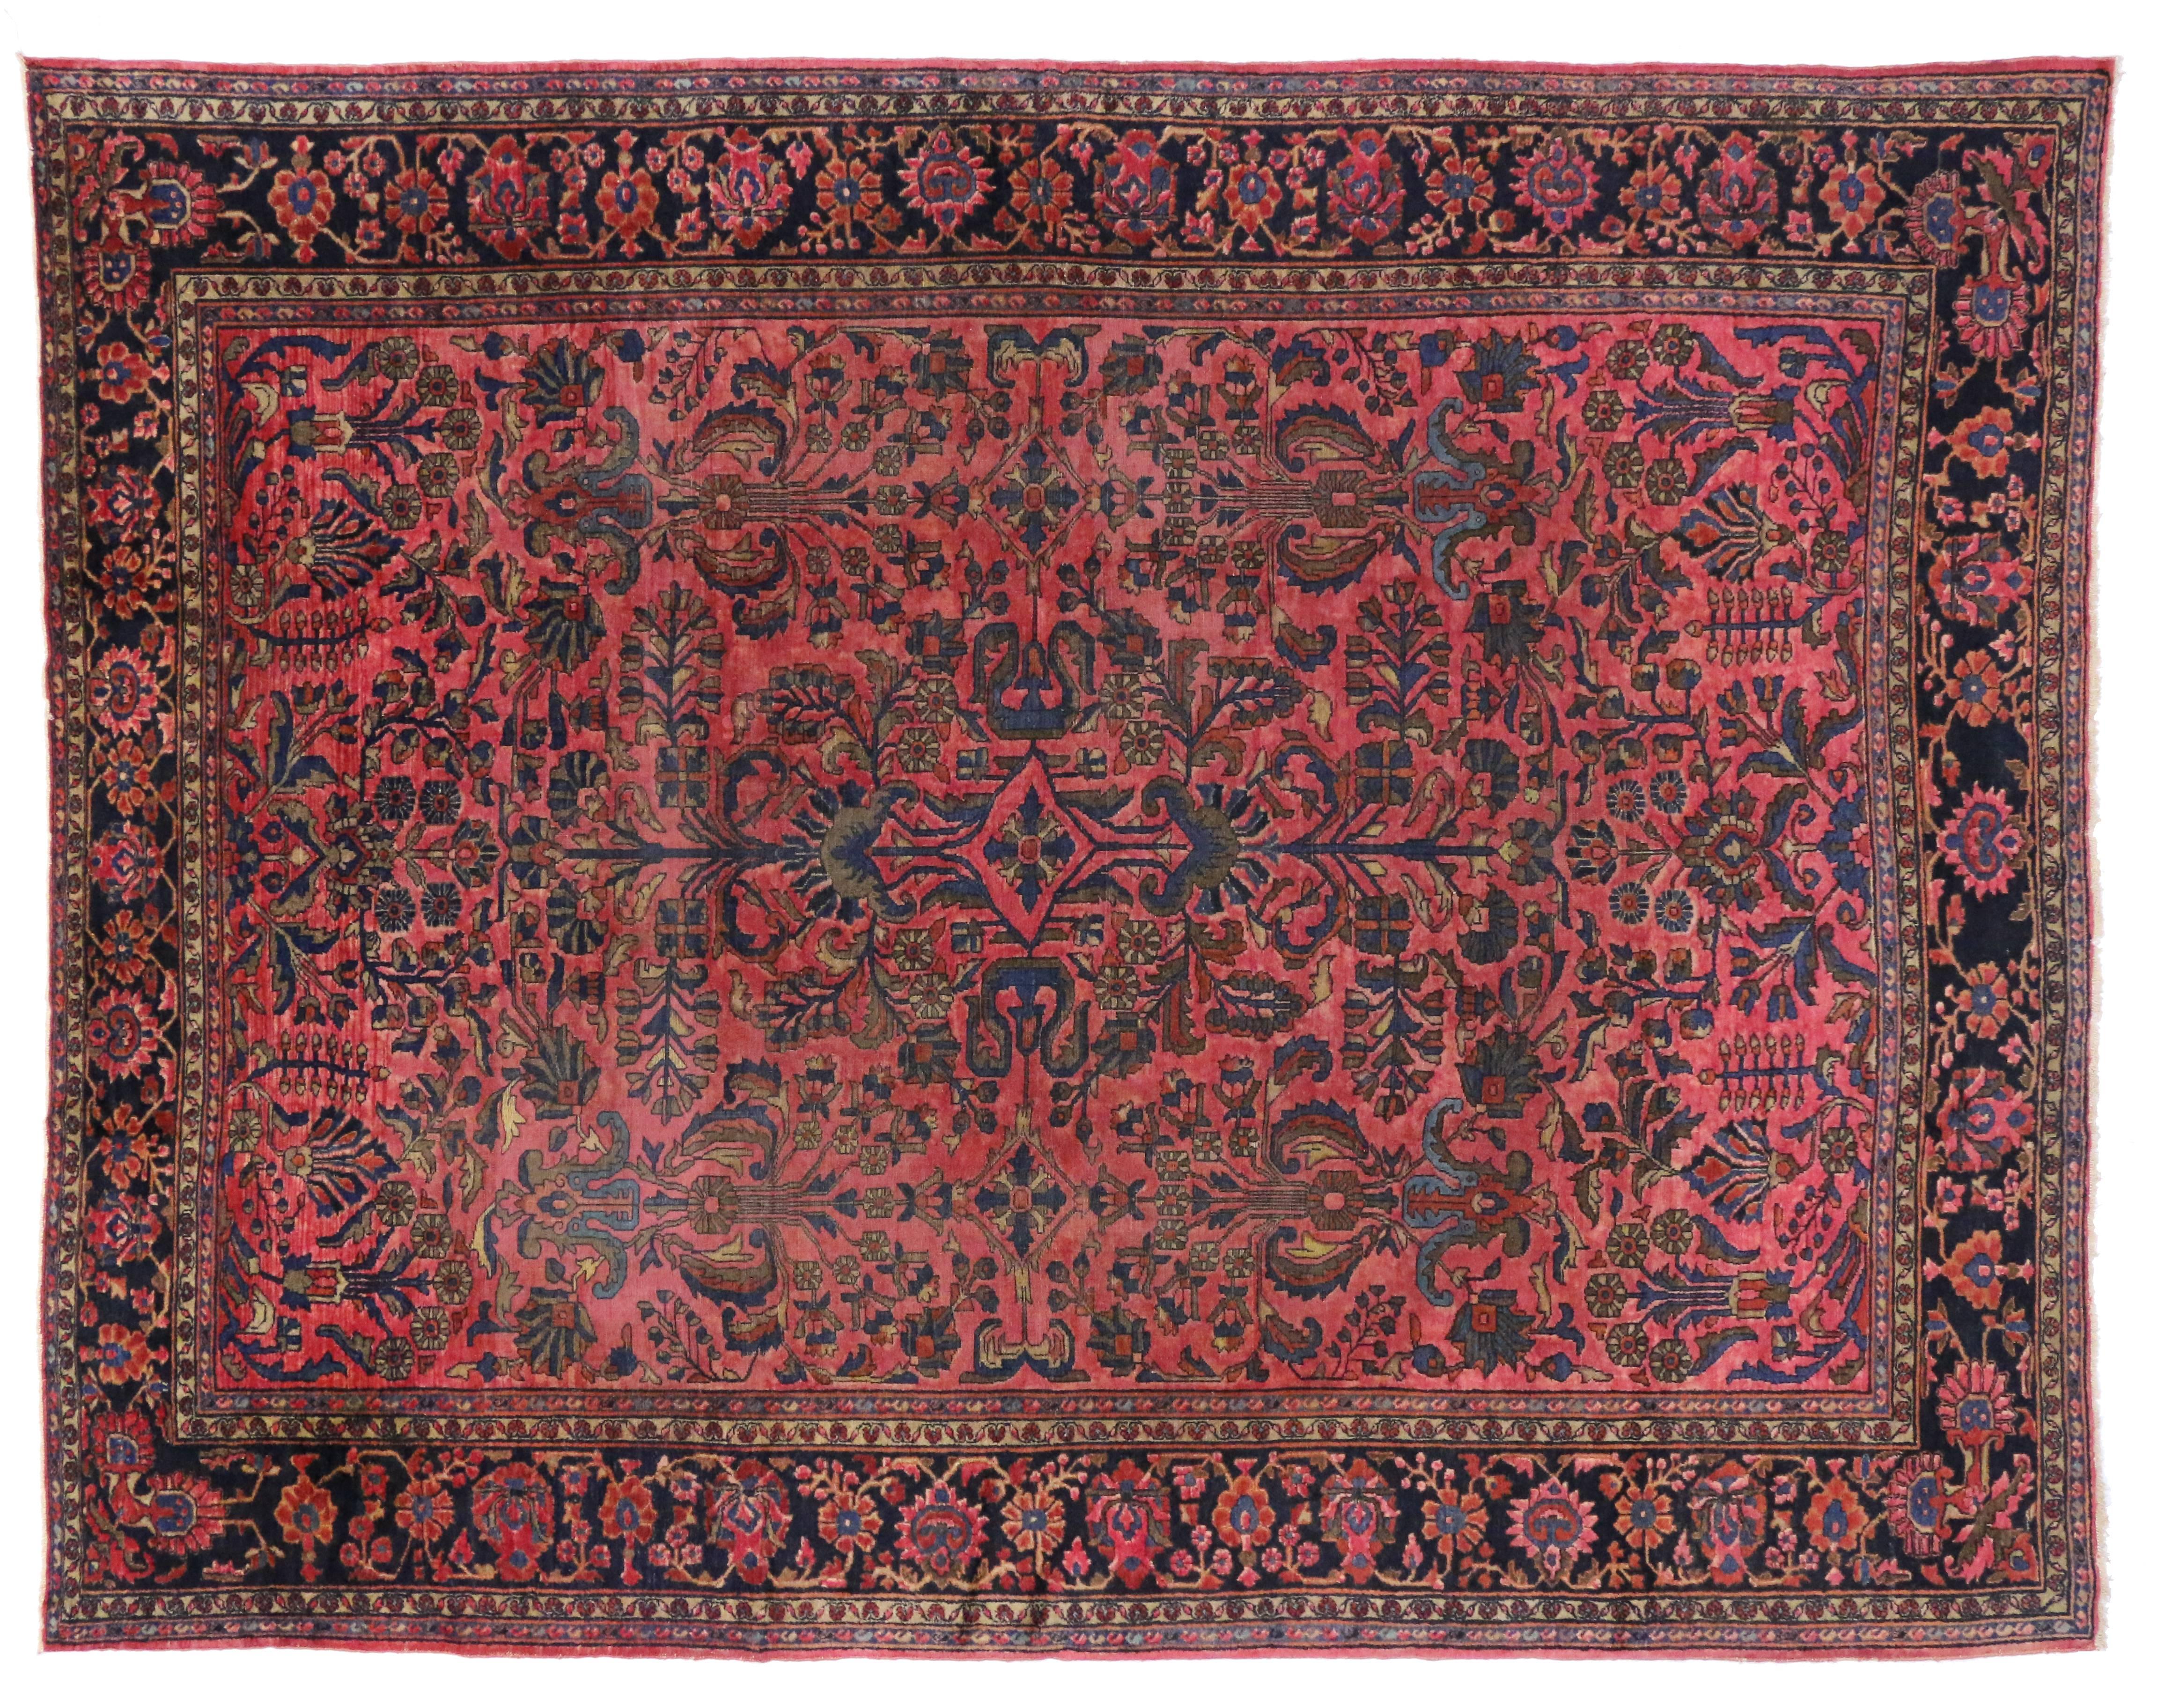 19th Century Distressed Antique Persian Lilihan Rug with Modern English Chintz Rustic Style For Sale